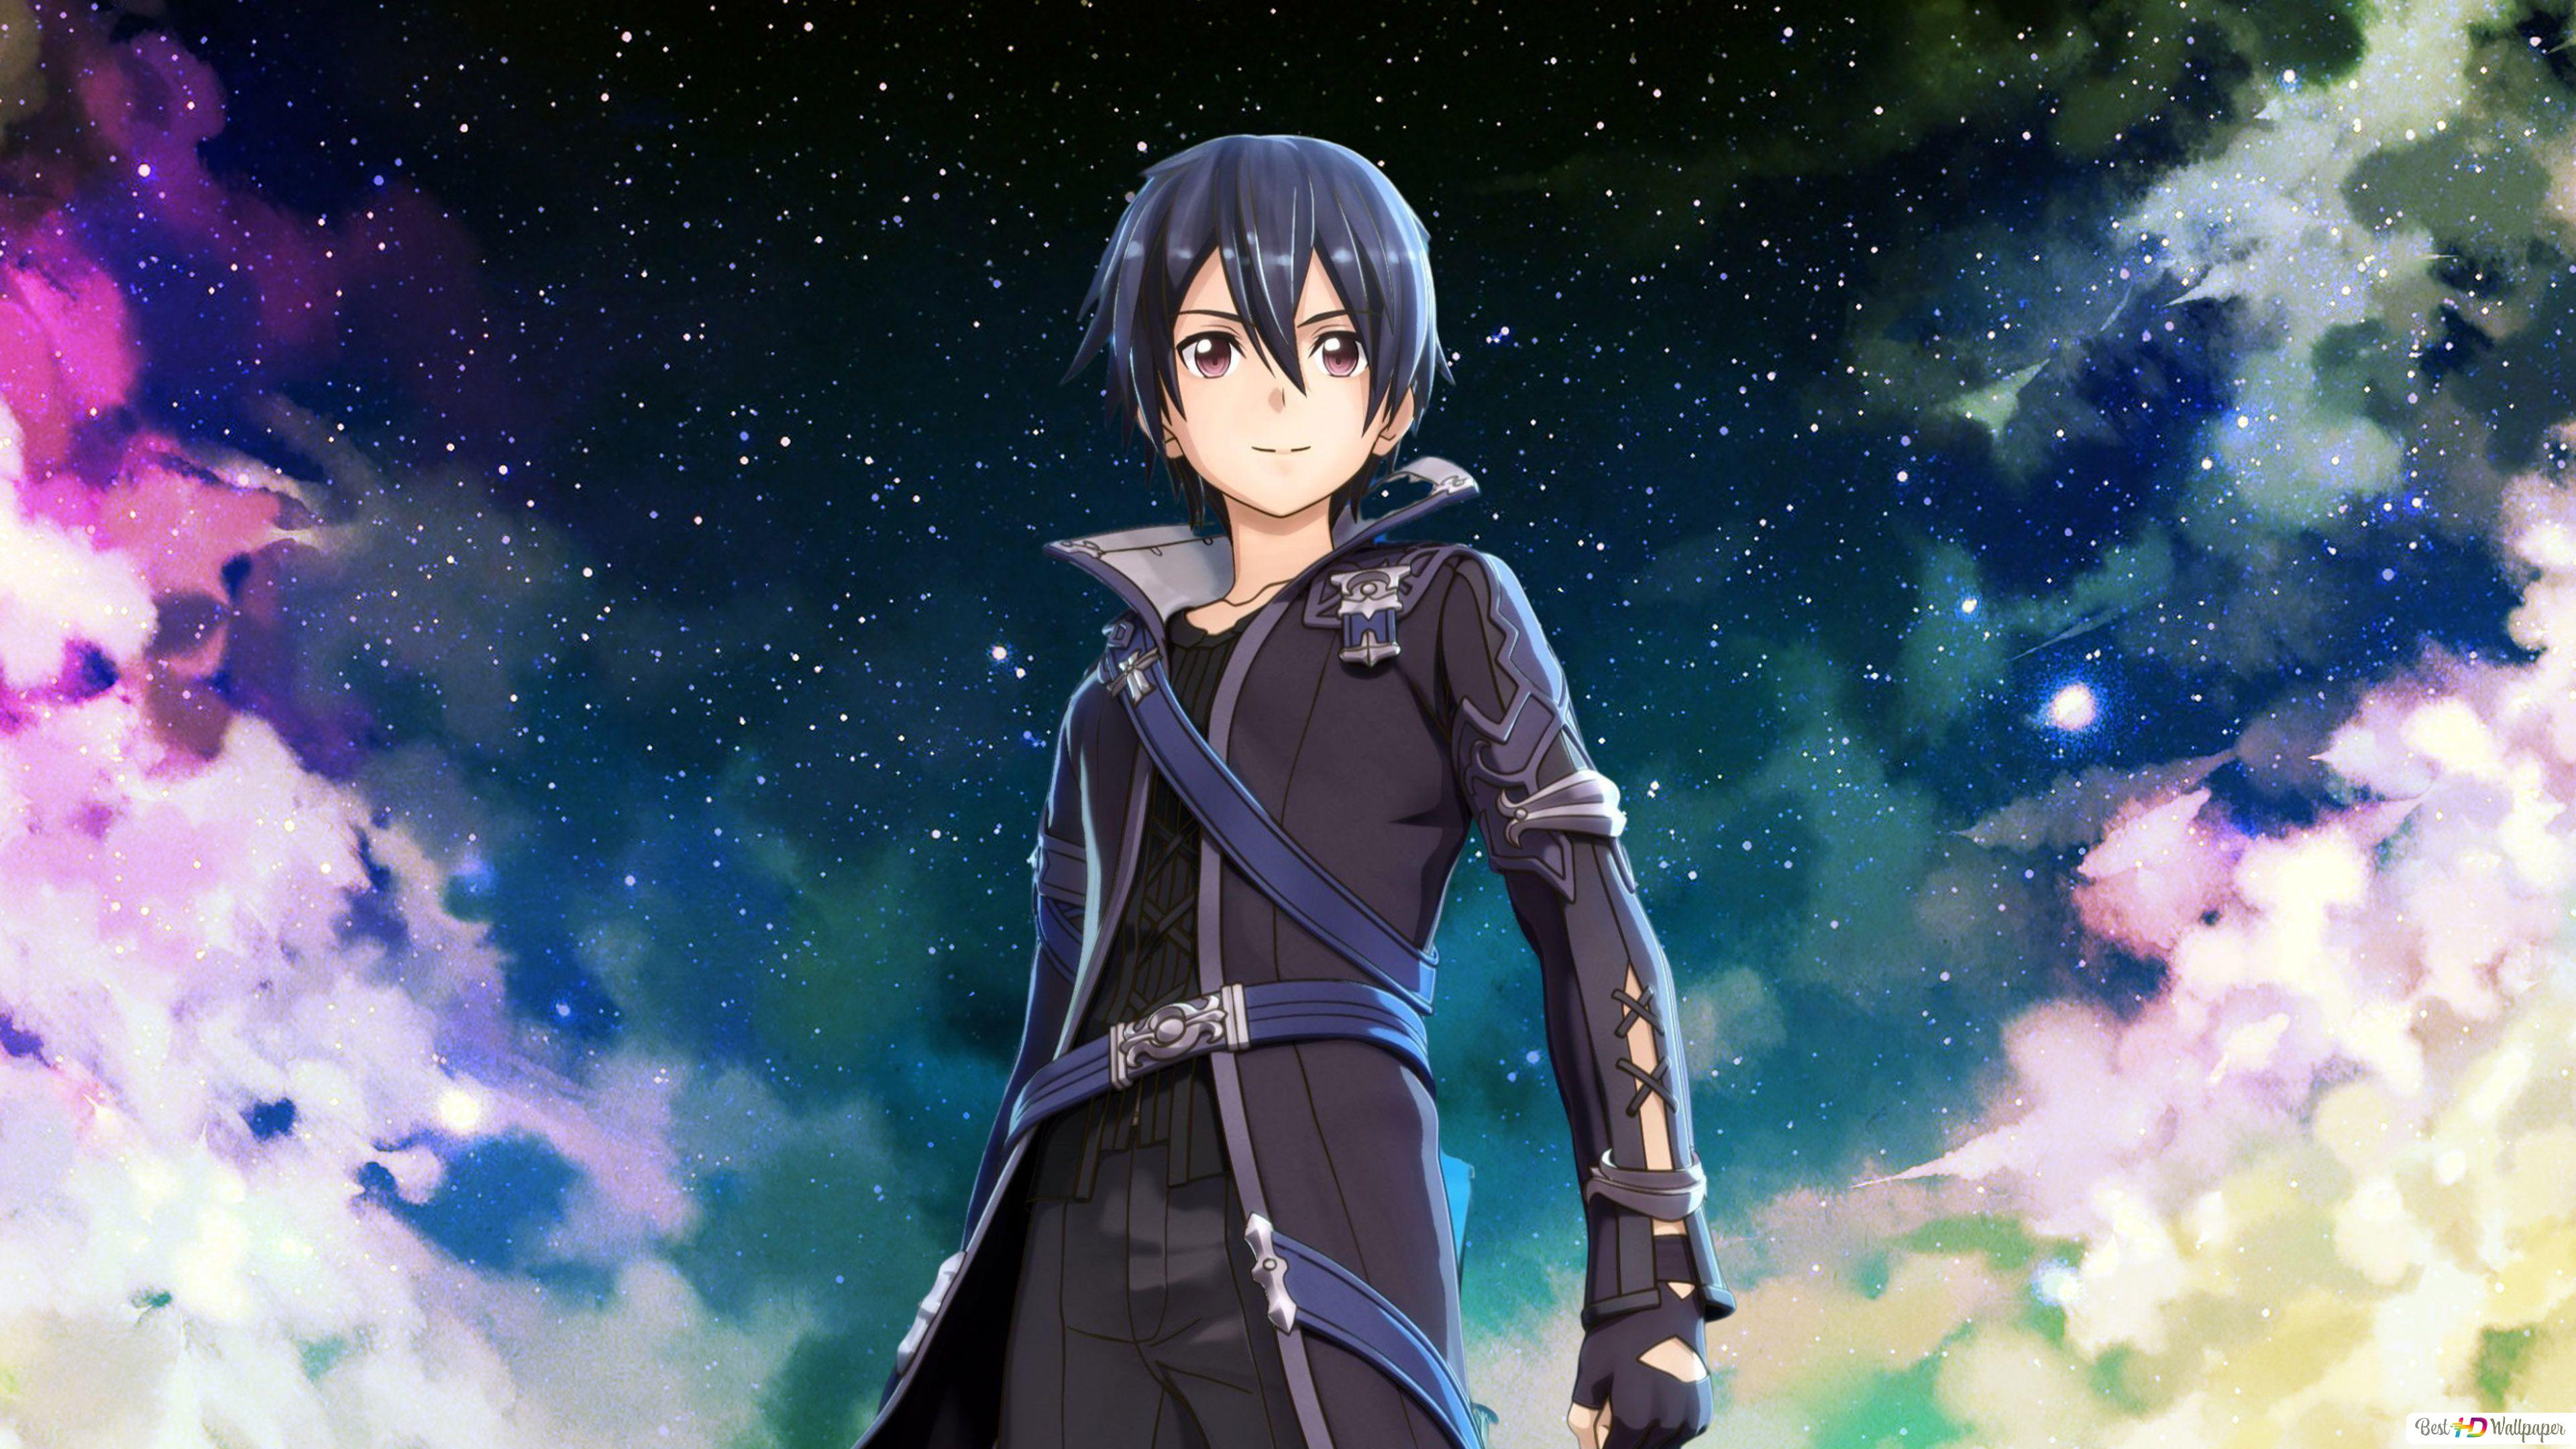 Stream the legend of legendary heroes OP lament.mp3 by Kirito